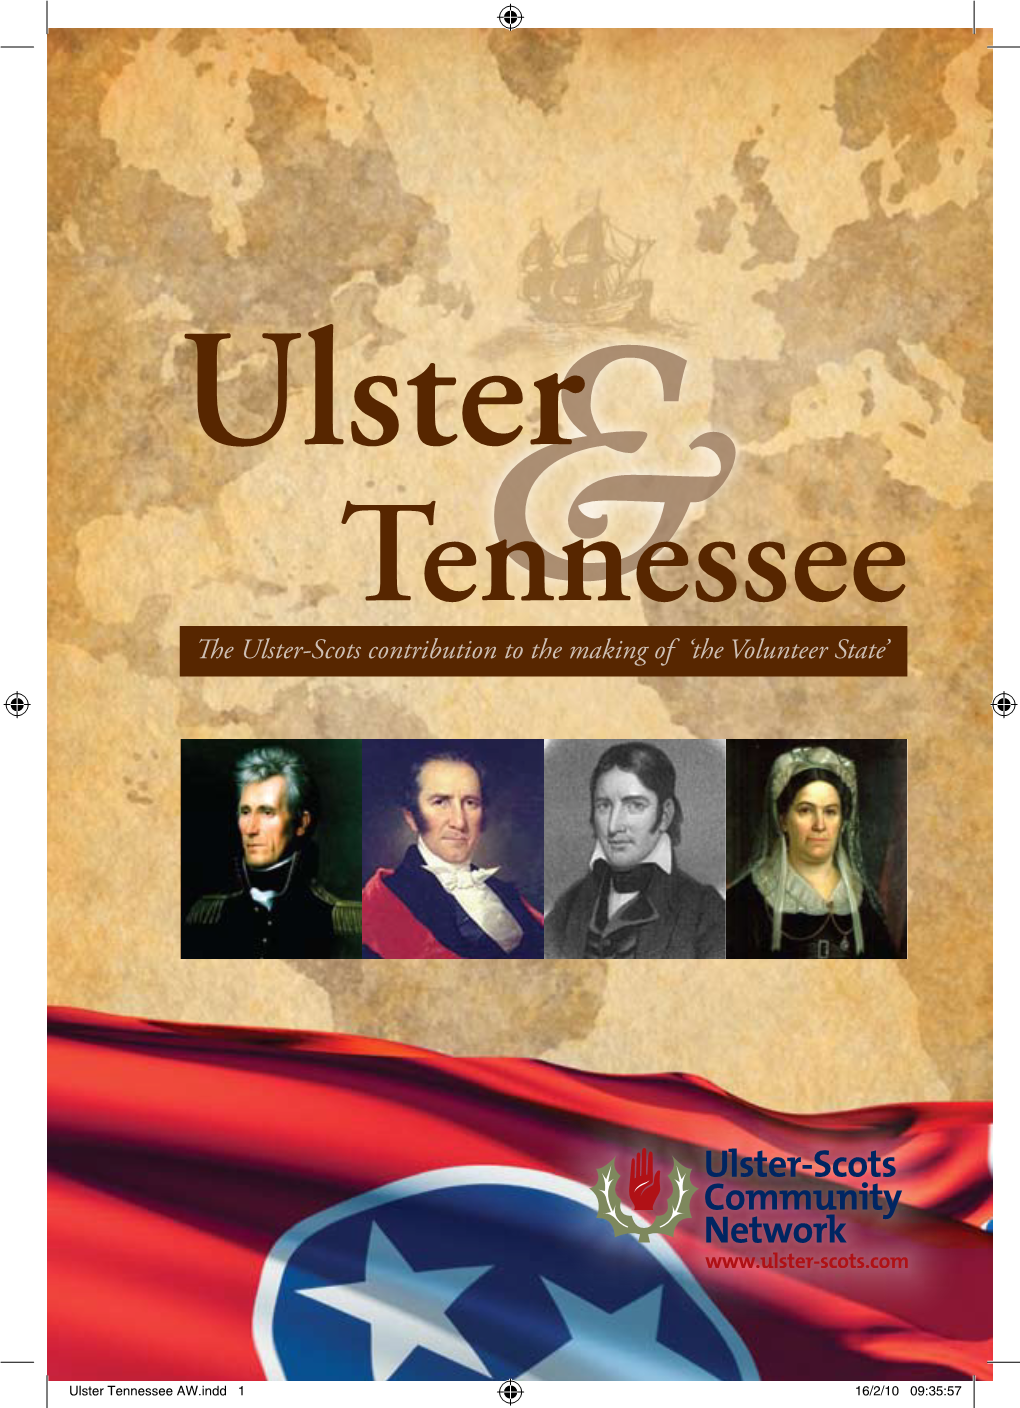 Tennessee& the Ulster-Scots Contribution to the Making of ‘The Volunteer State’